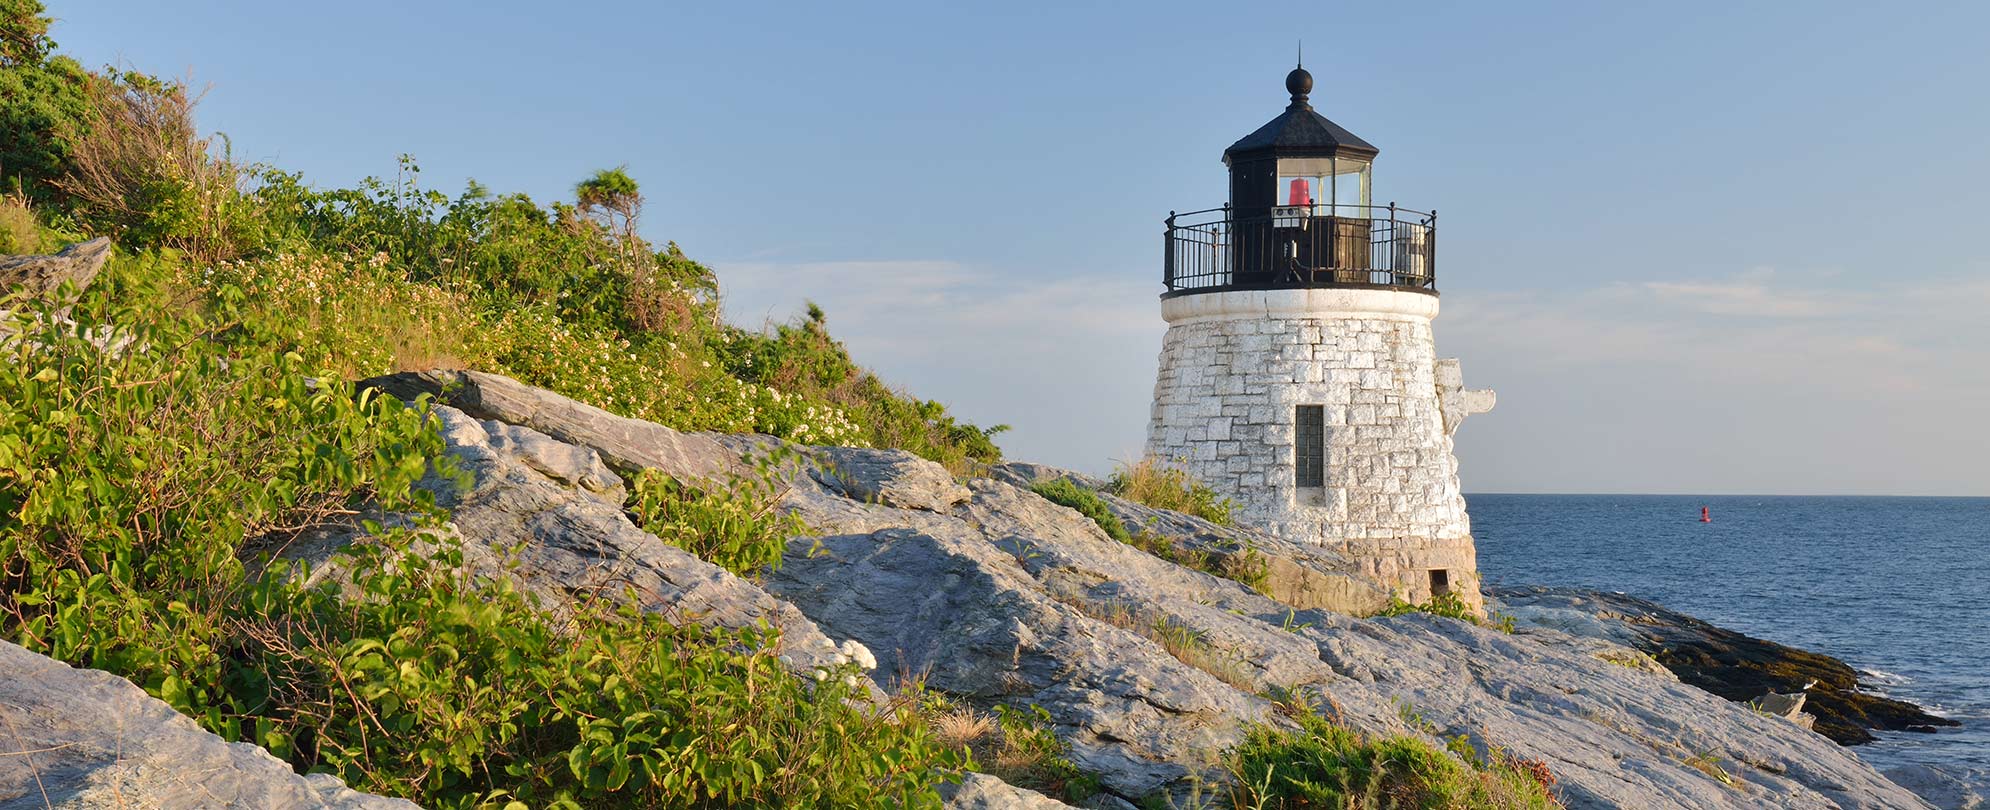 The Castle Hill Lighthouse, located on Narragansett Bay in Newport, Rhode Island.